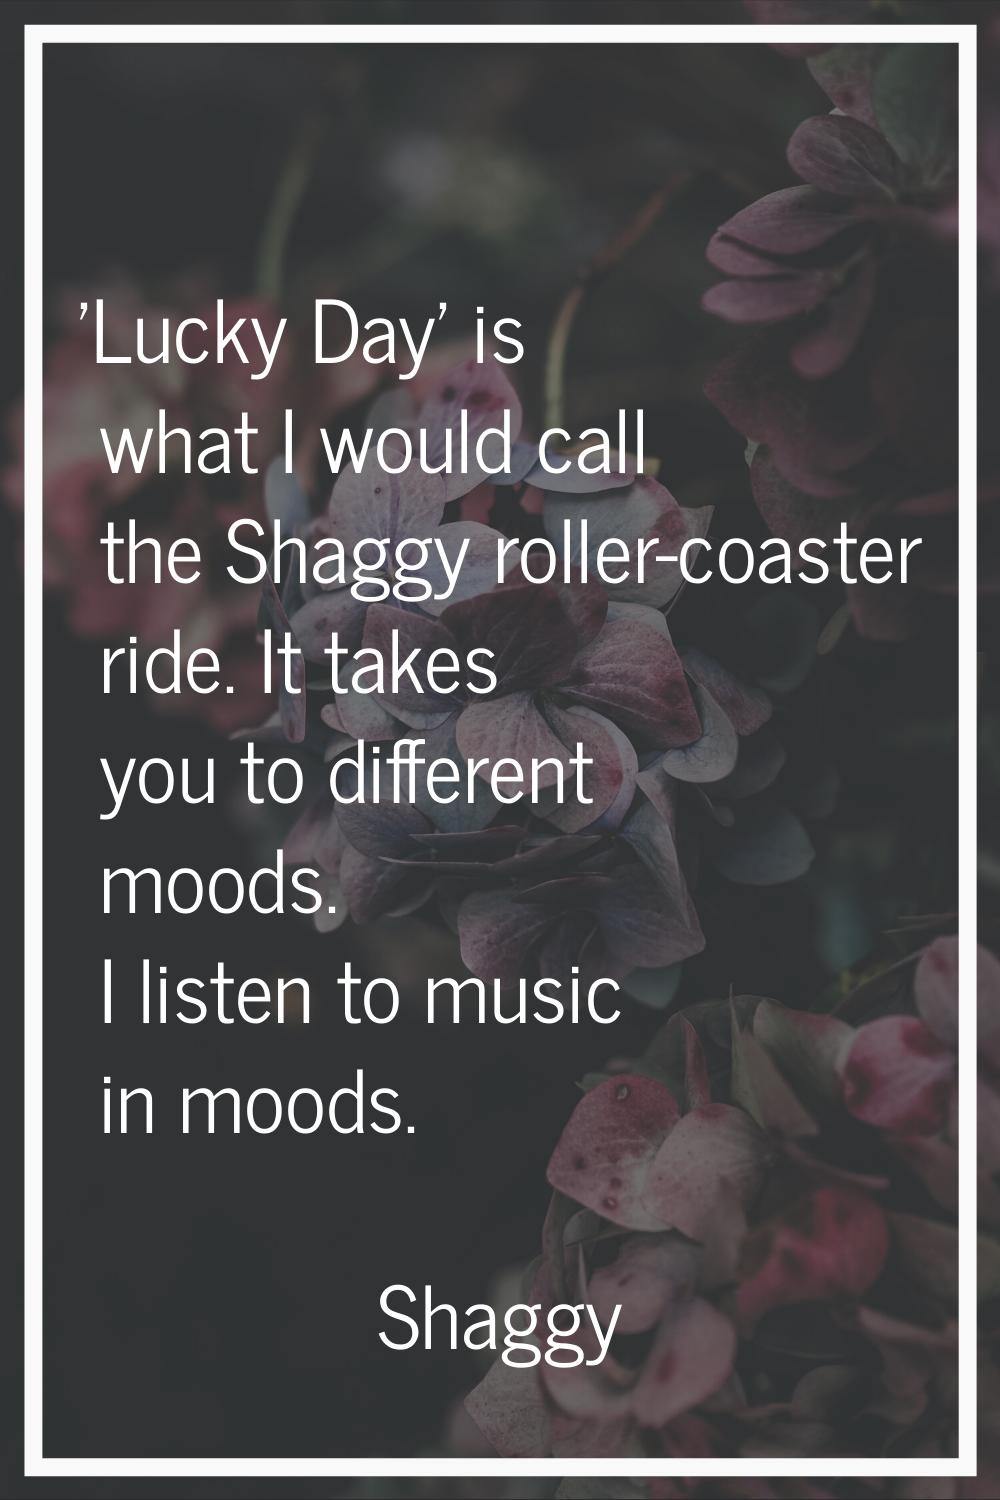 'Lucky Day' is what I would call the Shaggy roller-coaster ride. It takes you to different moods. I